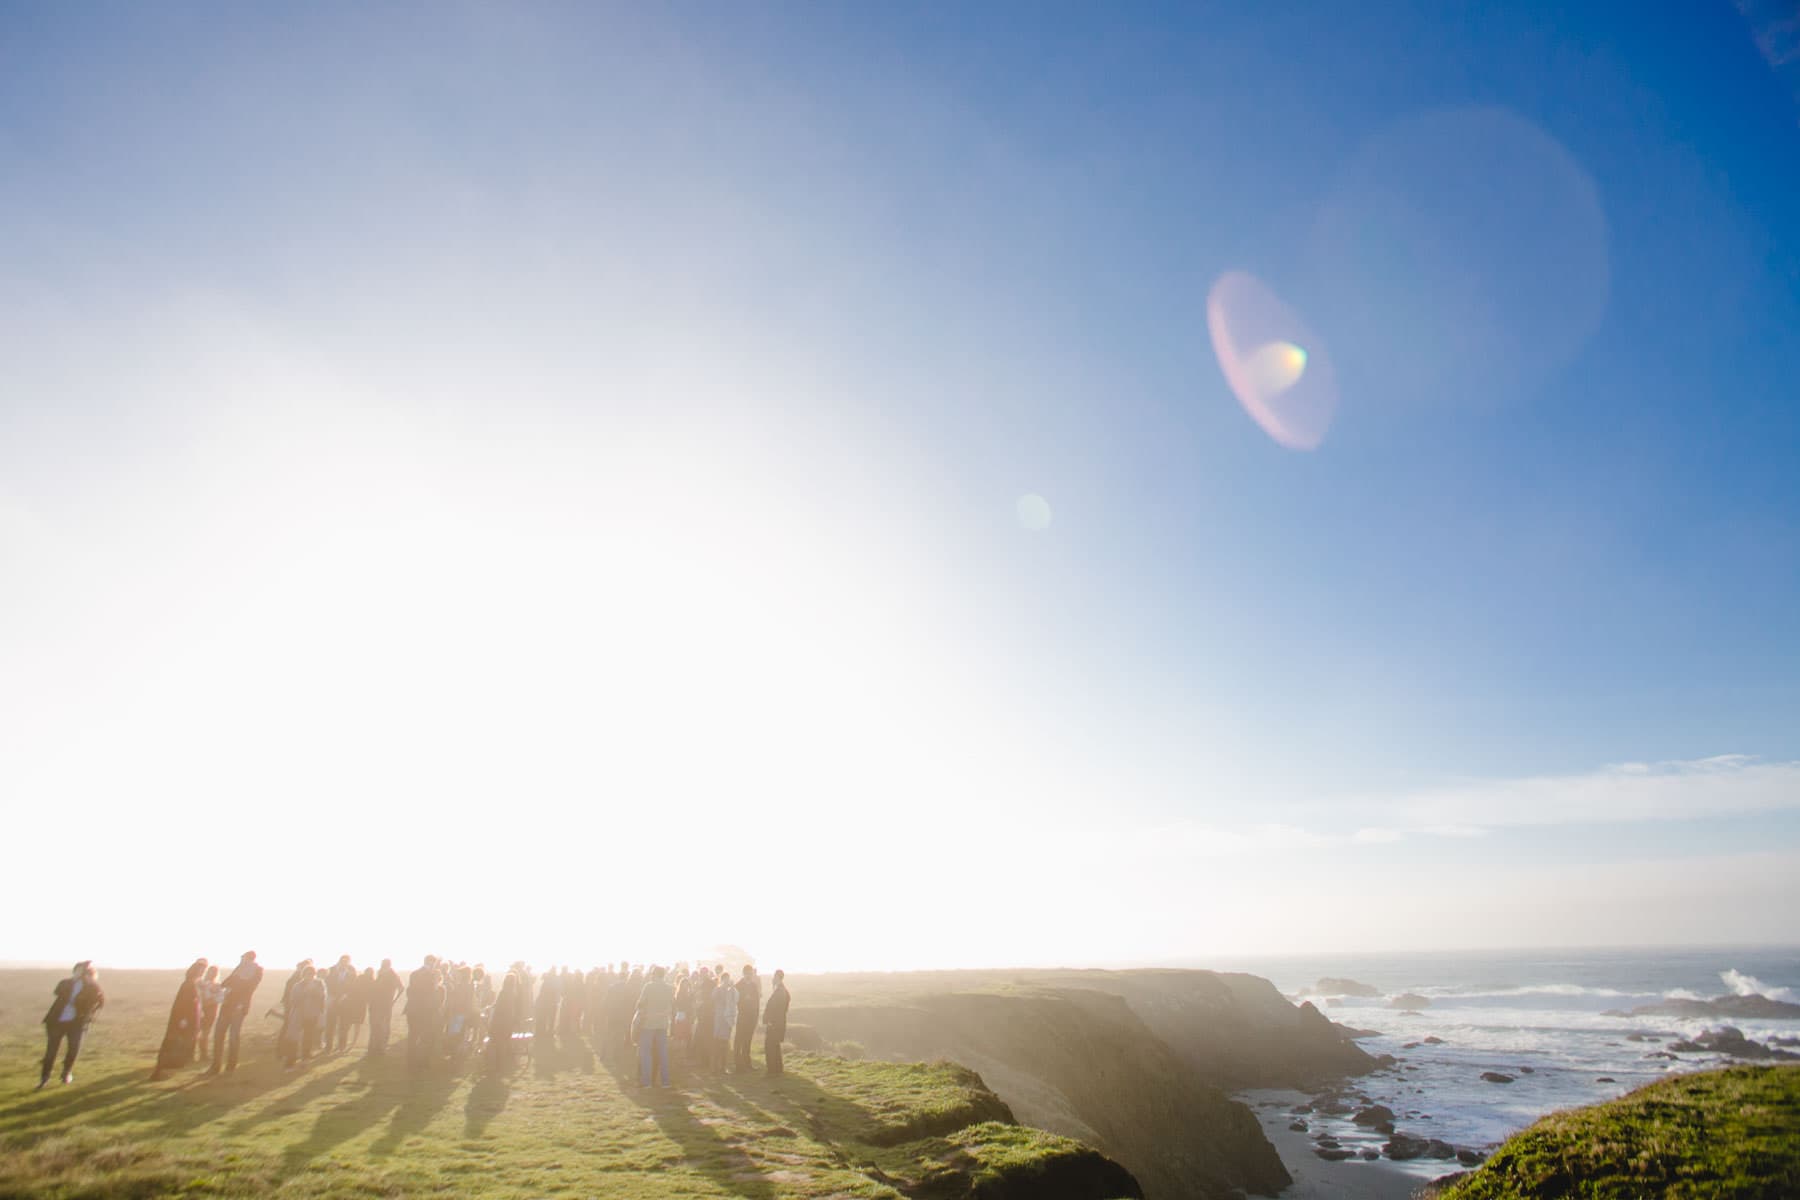 Large group of people off in the distance on a bluff overlooking the ocean